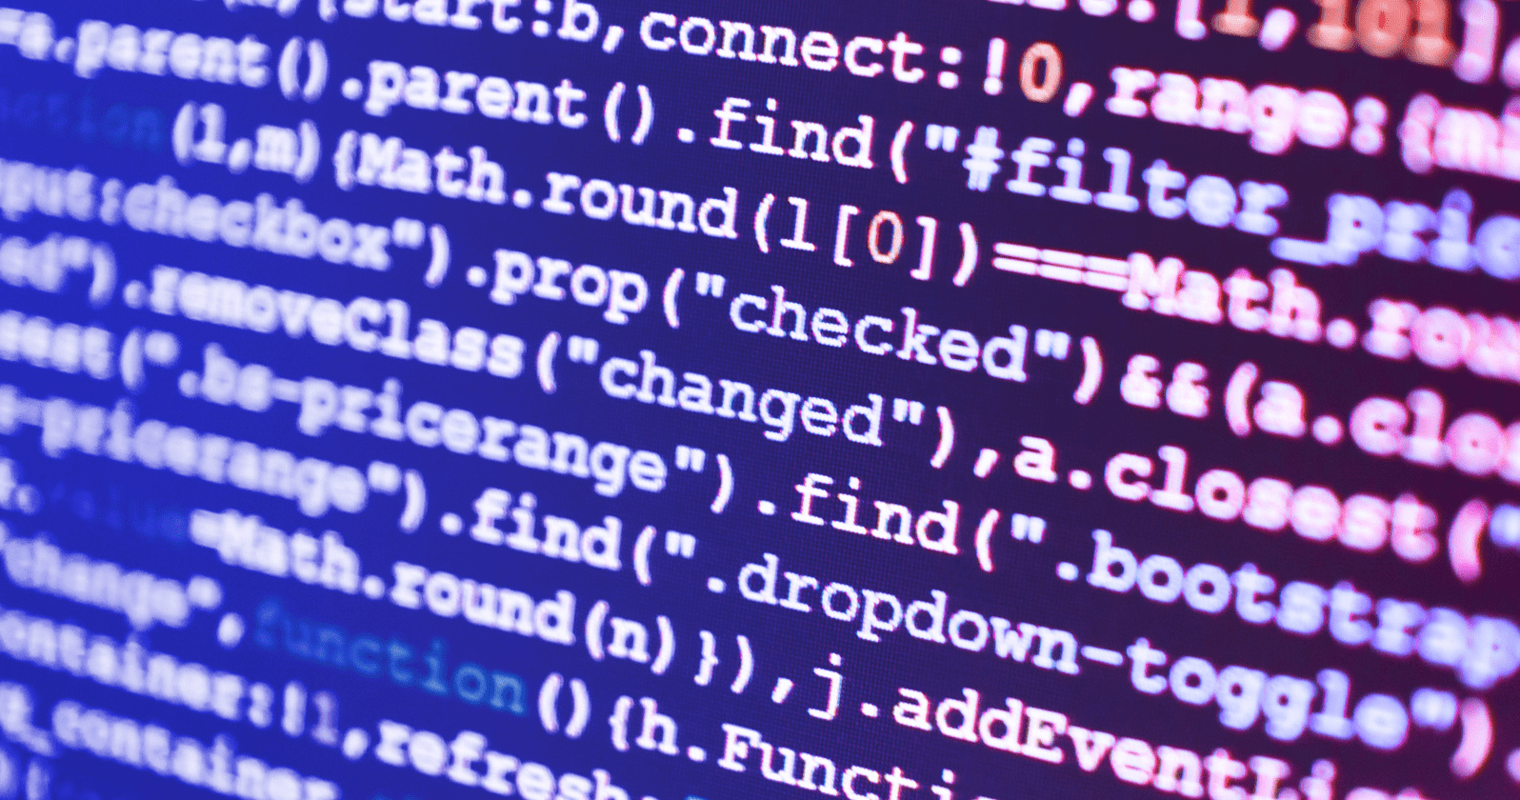 Google’s John Mueller Predicts Much More JavaScript in SEO in the Coming Years